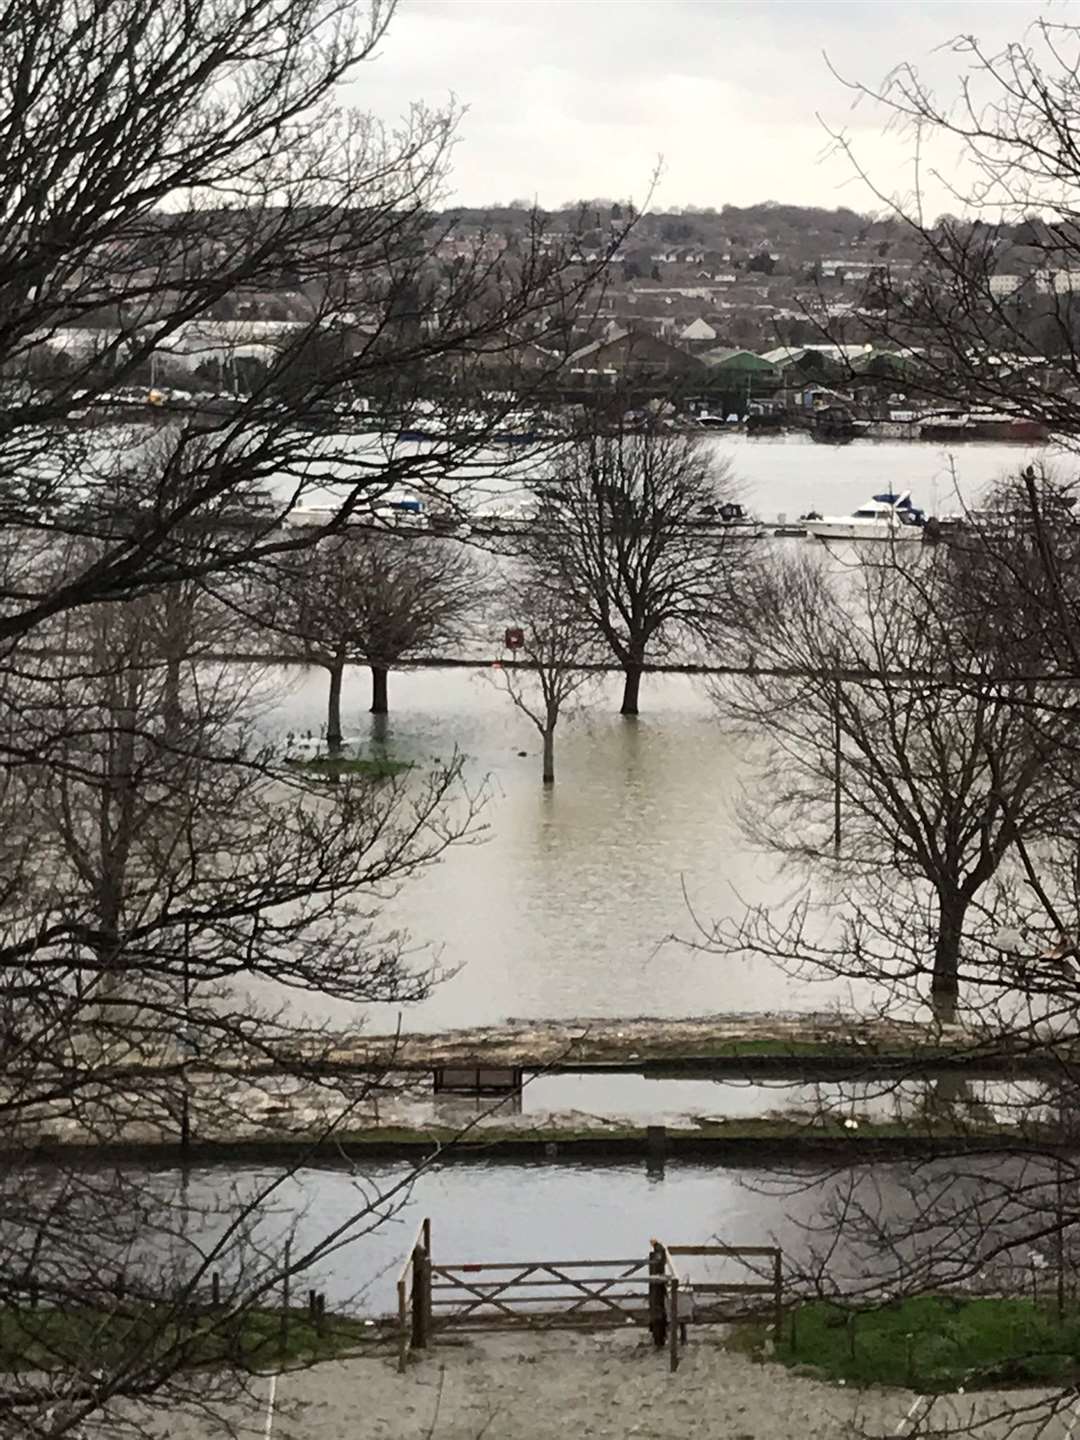 Flooding at the Esplanade in Rochester. Image: the Caithness family